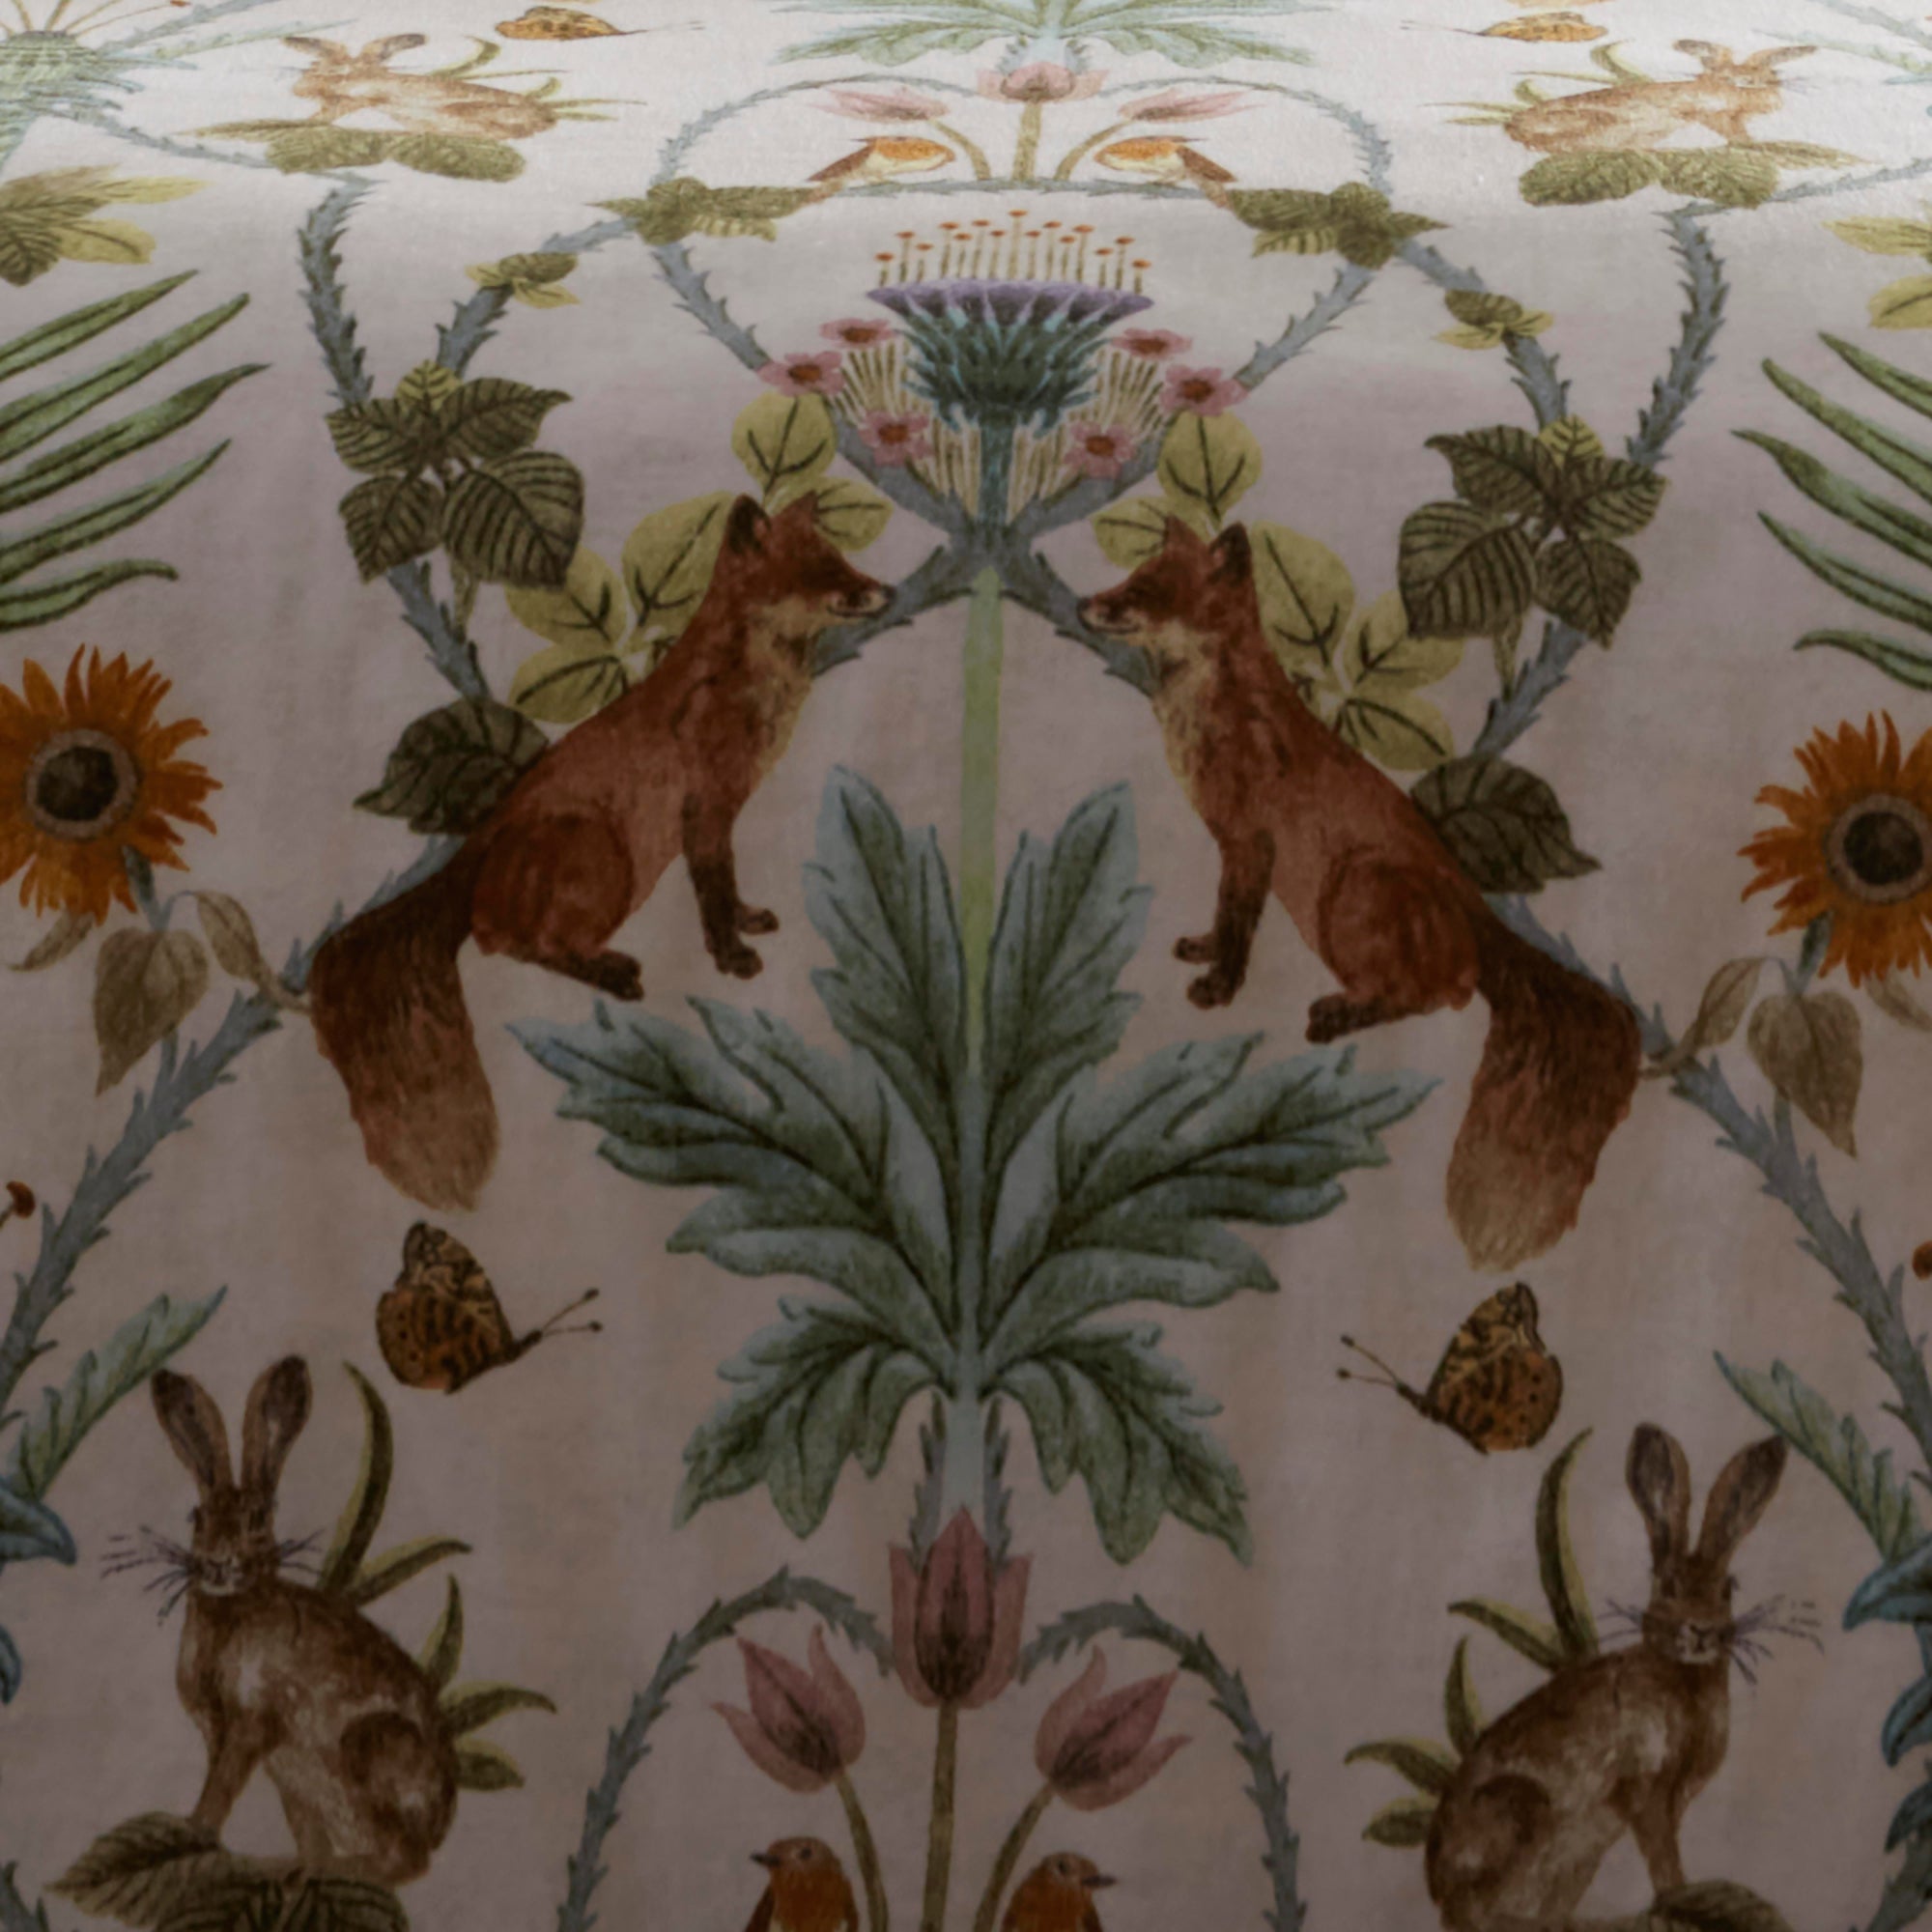 Duvet Cover Set Foxdale by Appletree Heritage in Natural